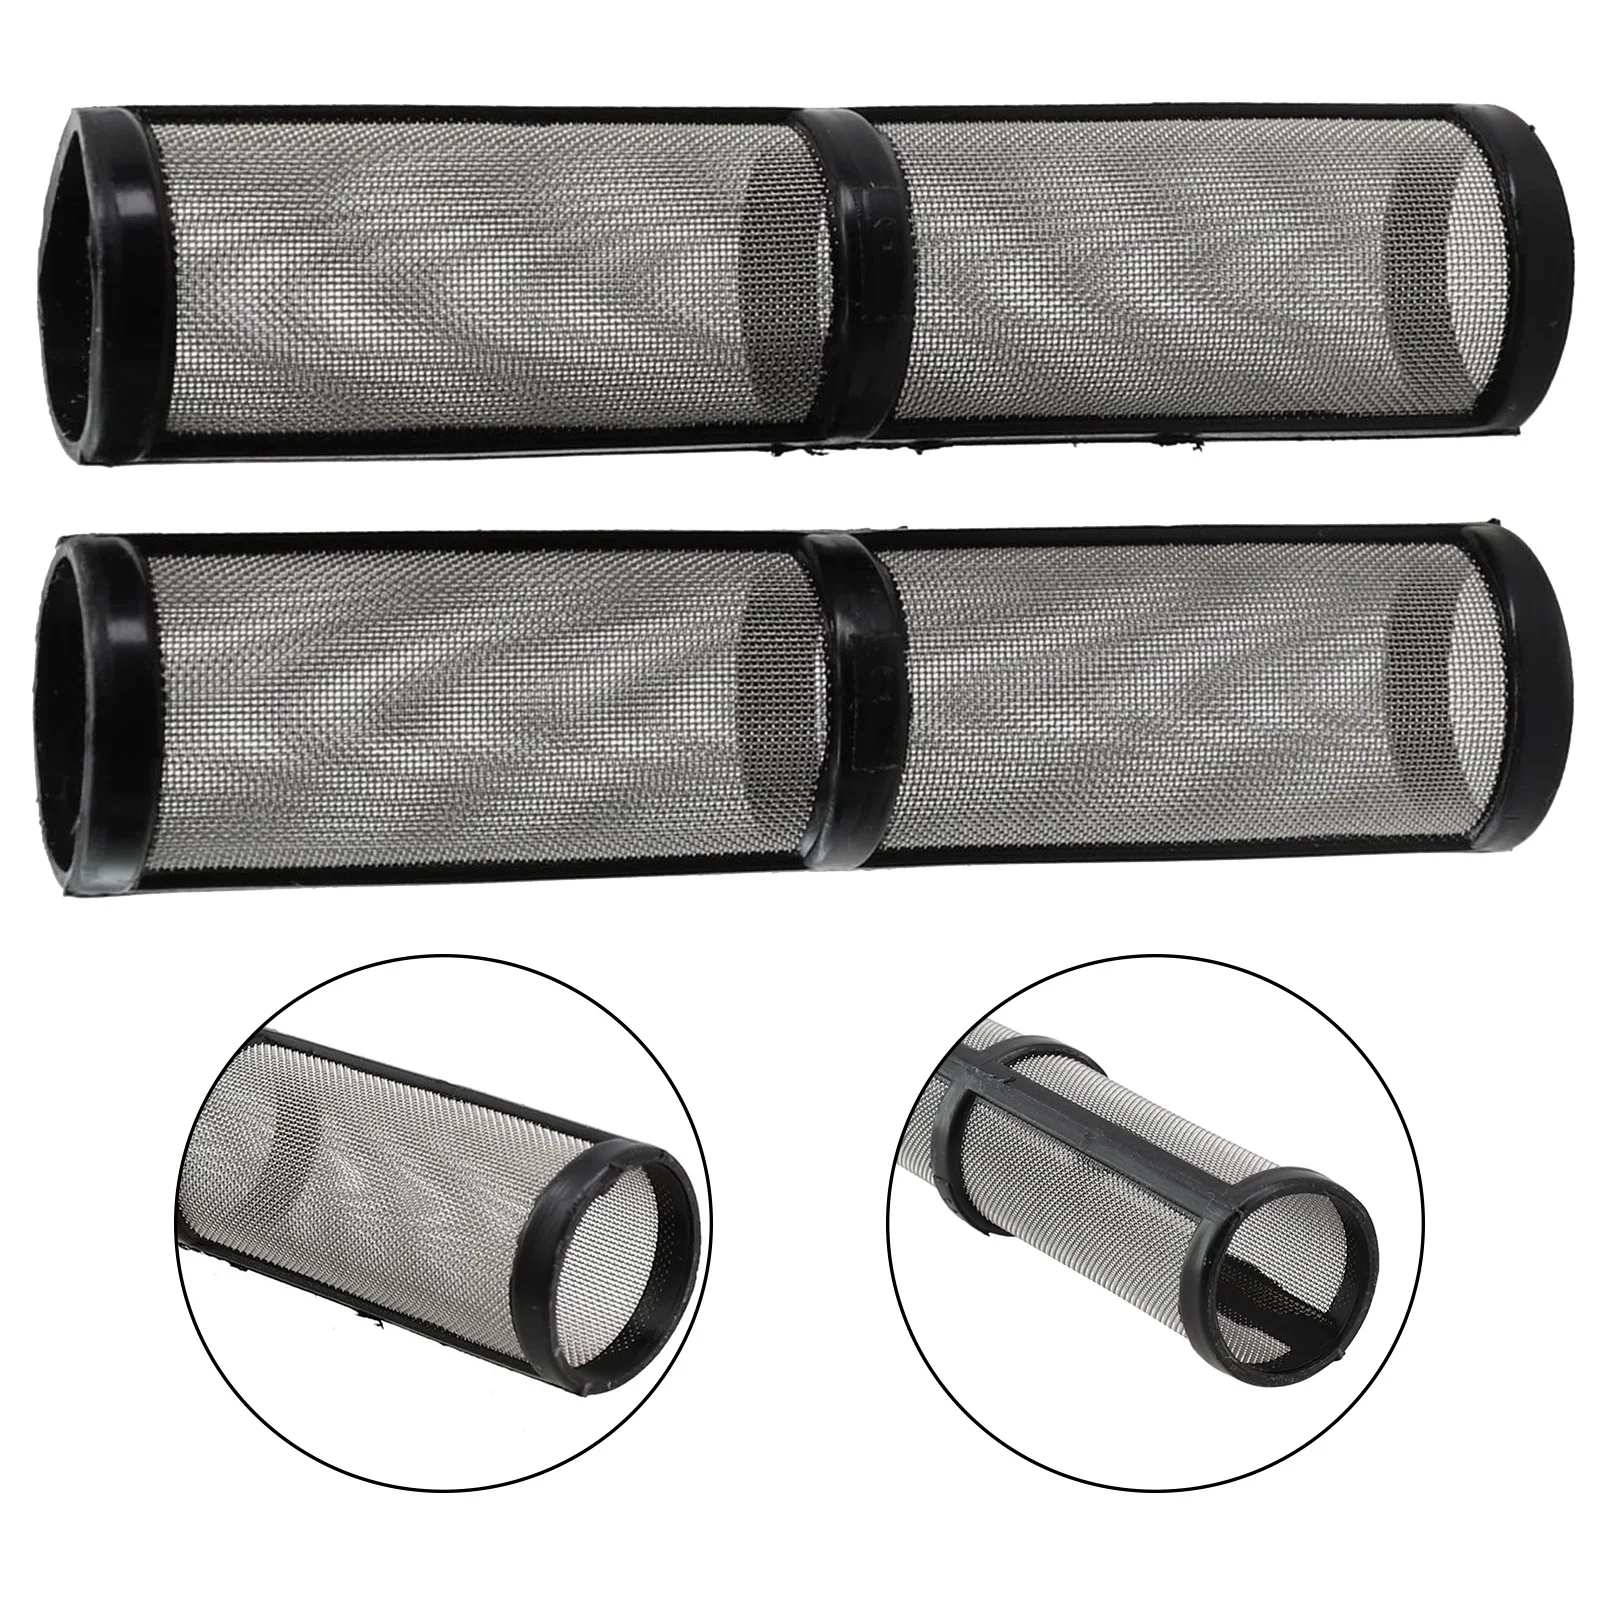 Efficiently Filter Coating Materials with 2pcs Mesh Airless Electric Paint Sprayer Filters for G390 G395 G495 G595 filter pump body coating stainless steel 2pcs 495 filter for g390 mesh airless paint sprayer black power tools